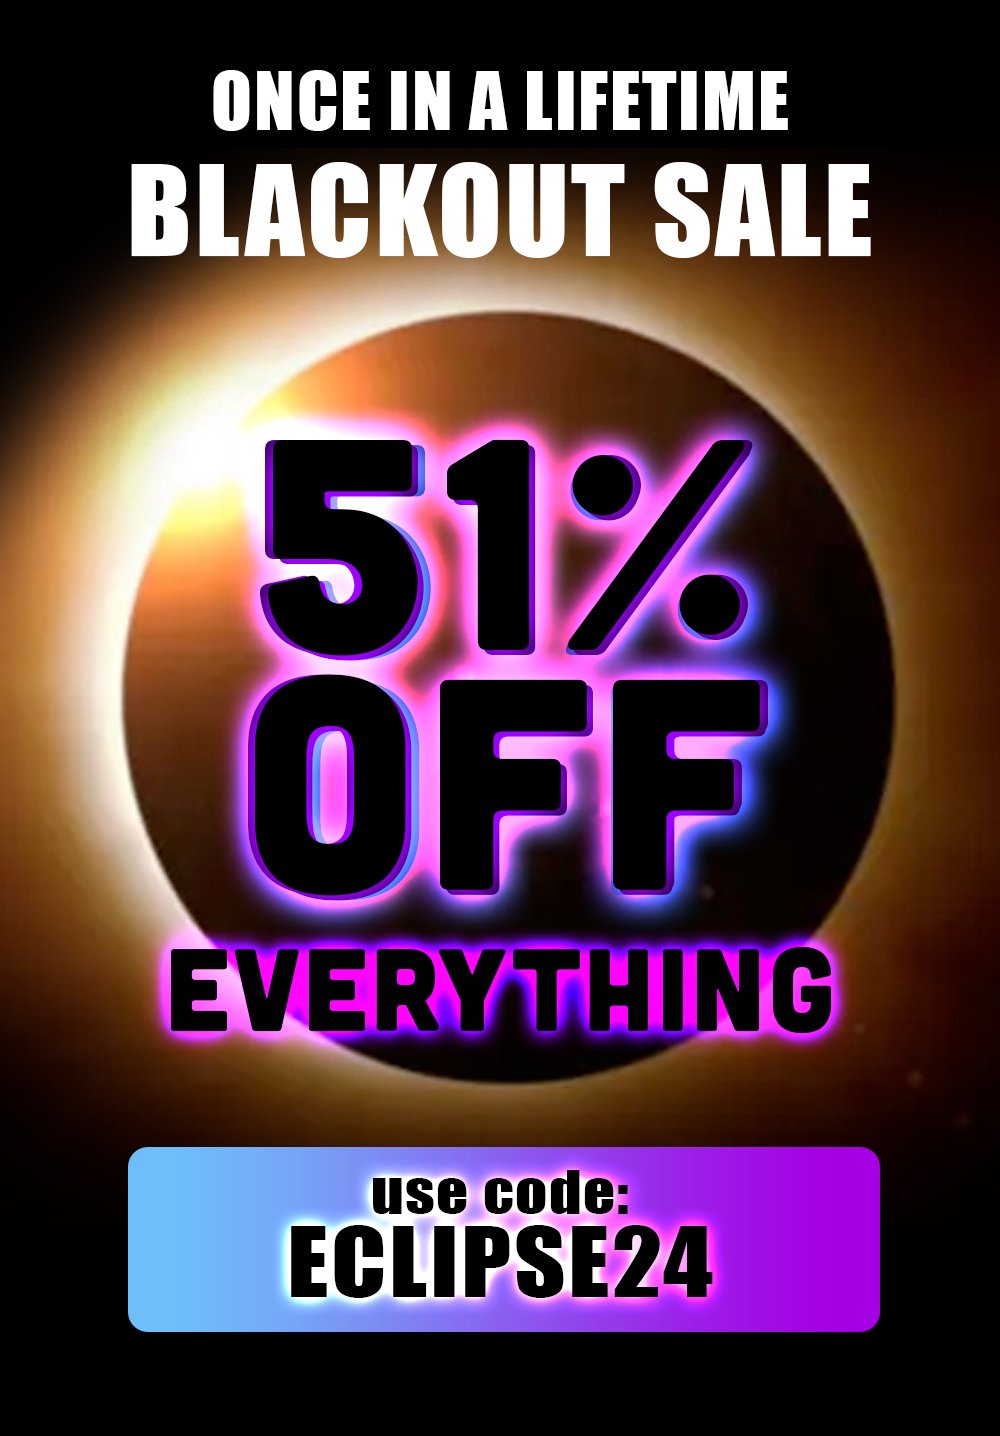 51% Off - Use code: ECLIPSE24